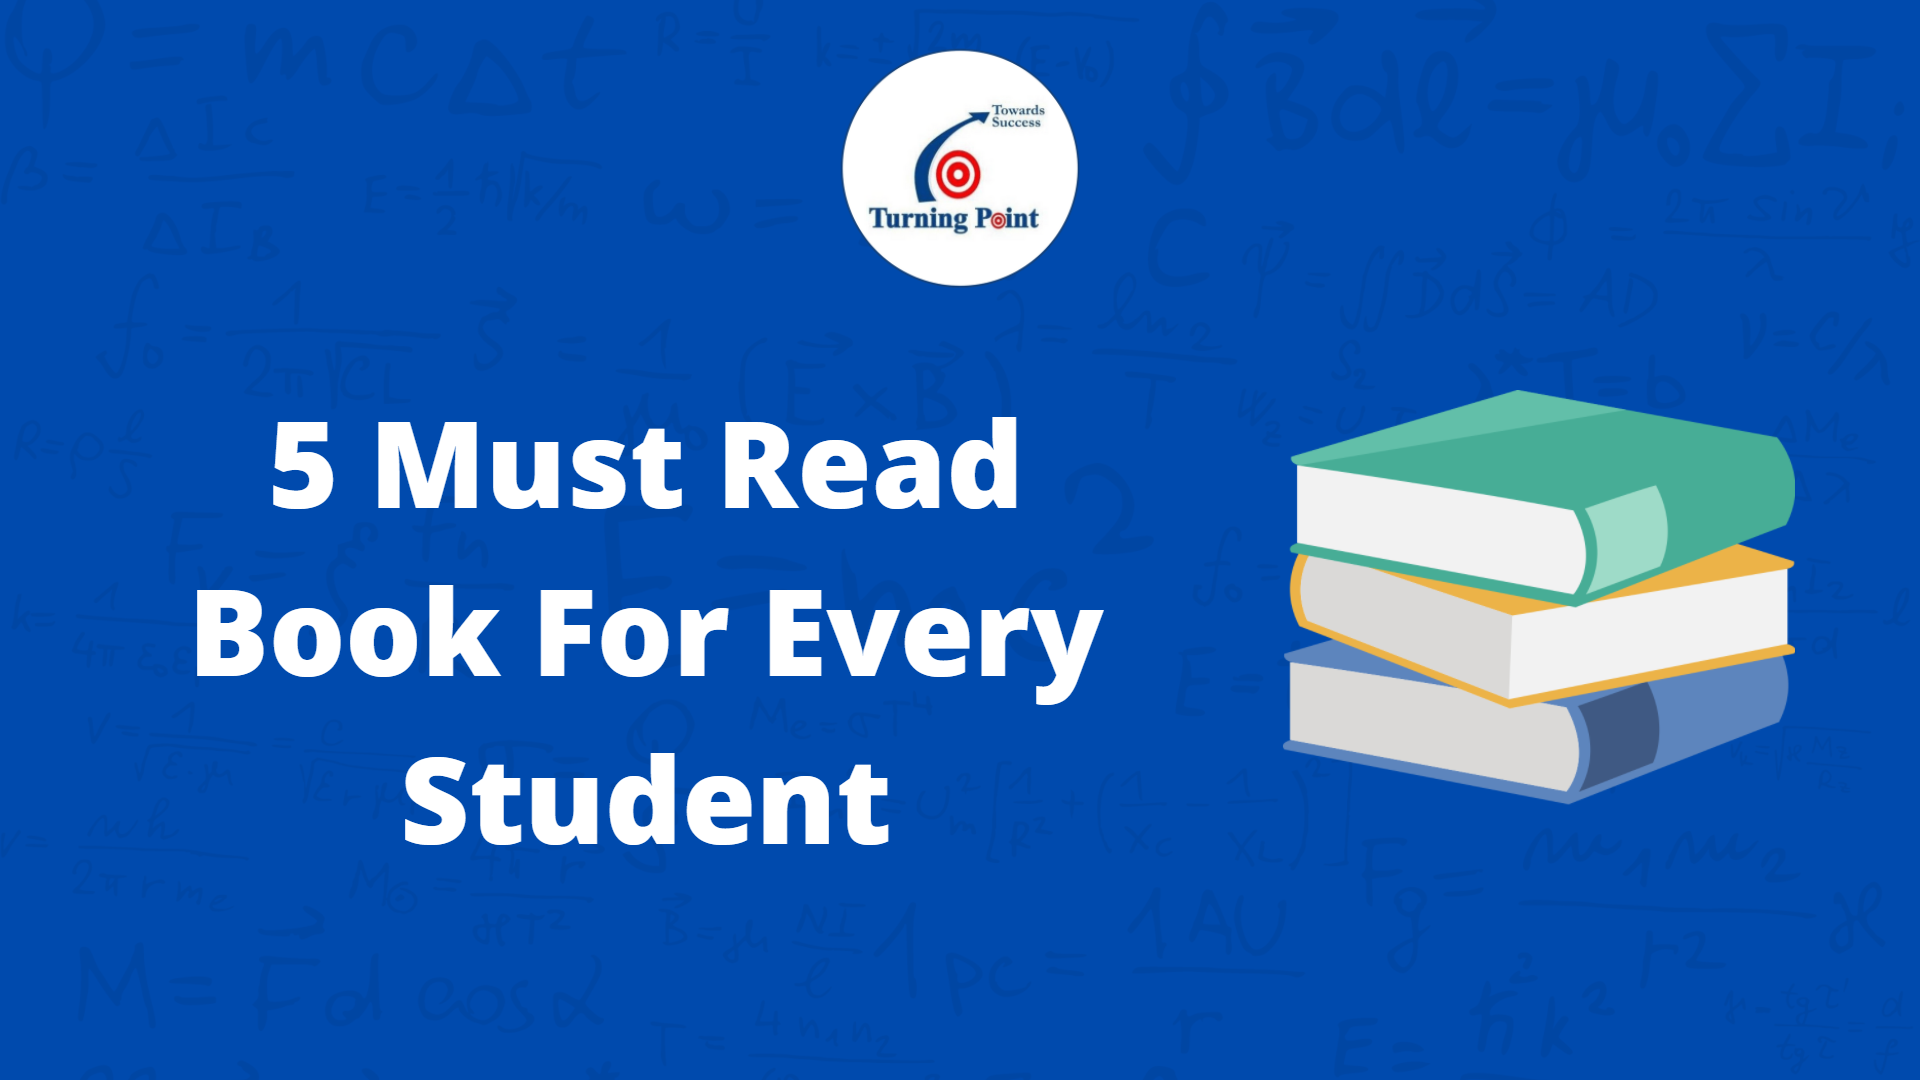 5 Must Read Book For Every Student